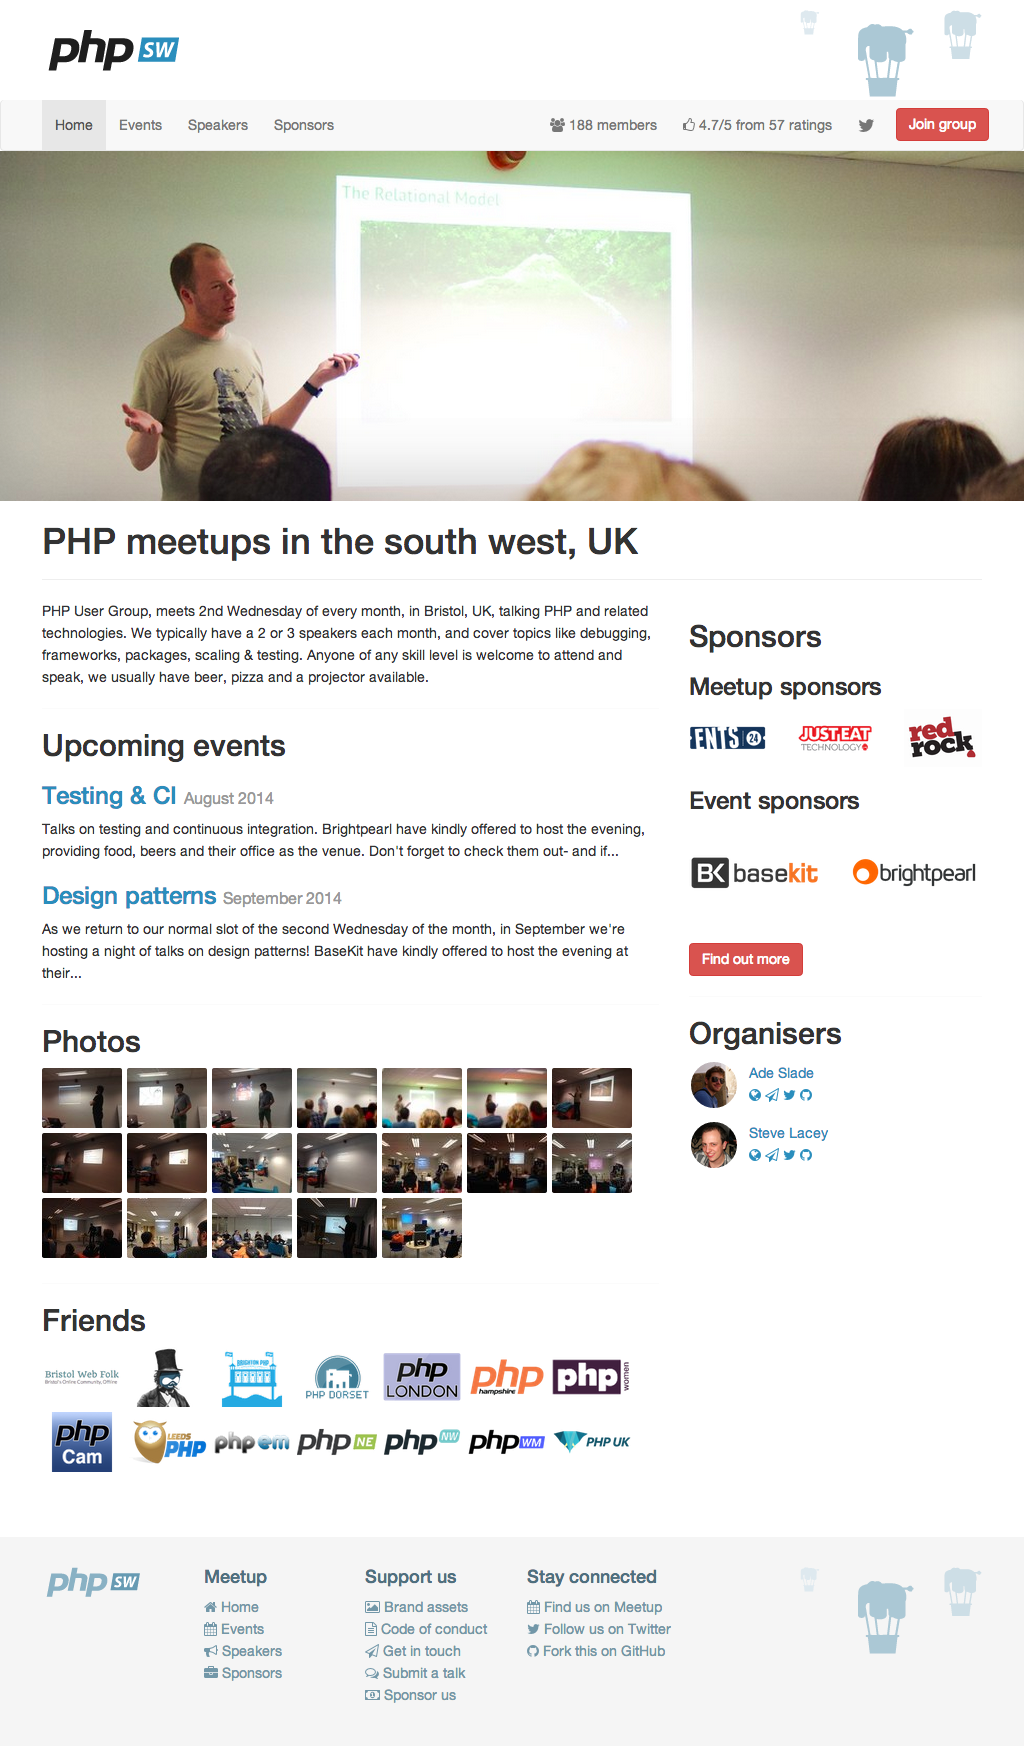 PHP South West UK